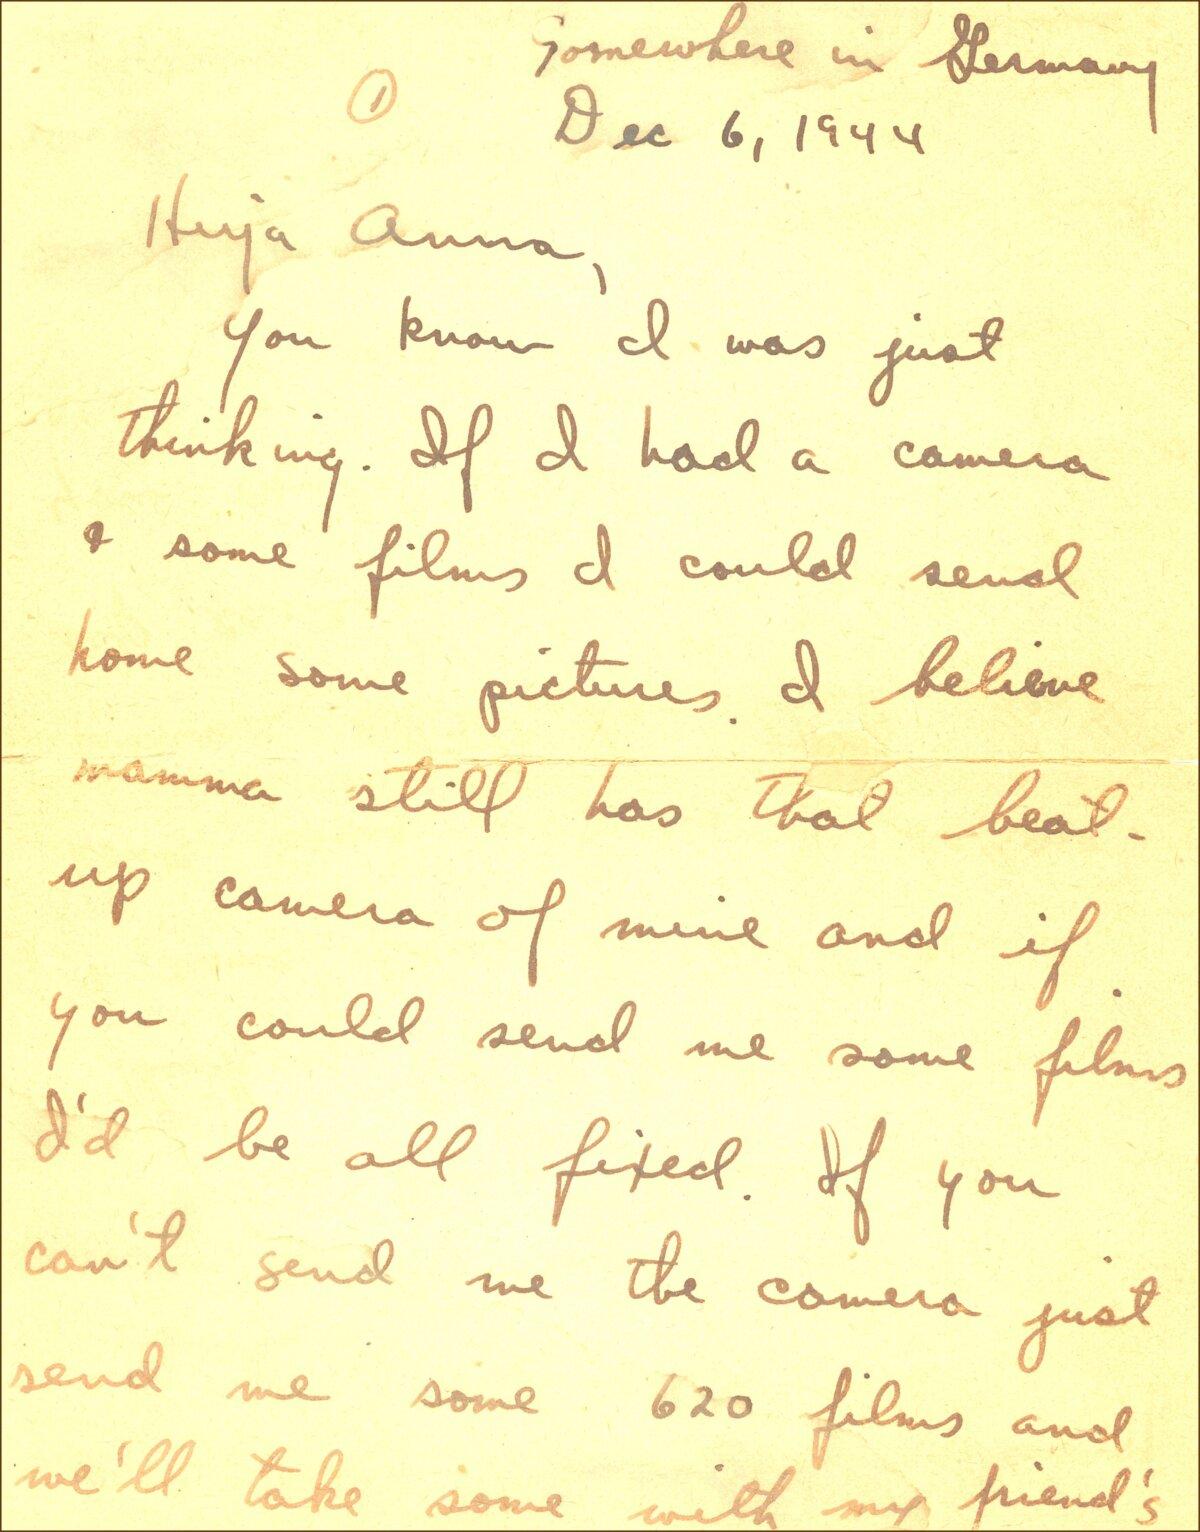 Page one of a letter Critelli wrote to his sister, Anna, dated December 6, 1944, from "Somewhere in Germany," and the envelope it was mailed in. （Courtesy of Dominick Critelli）